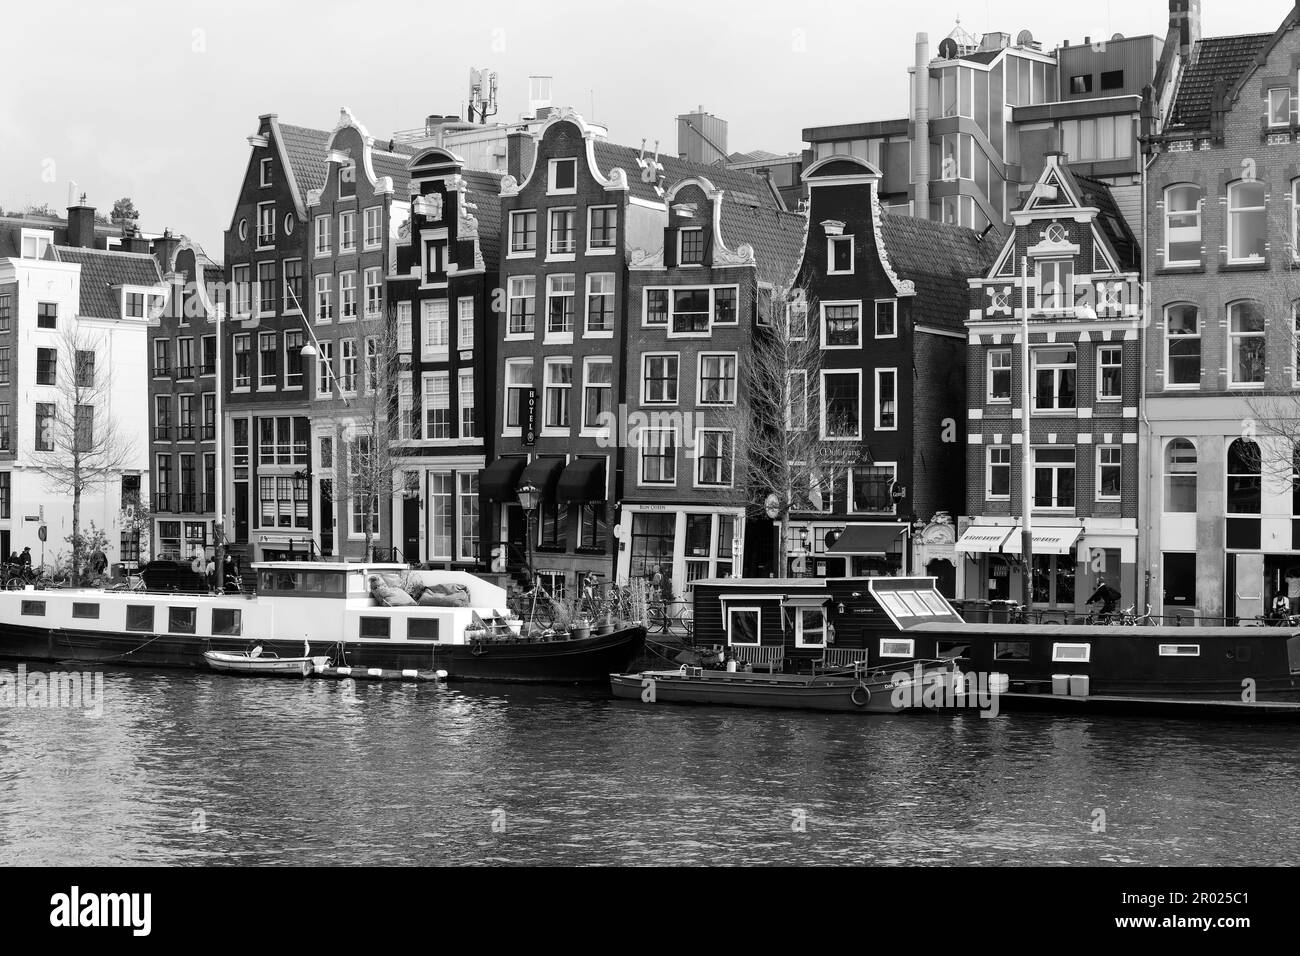 Traditional Dutch canal side housing architecture with moored boats in black and white, Amsterdam, Holland. Stock Photo